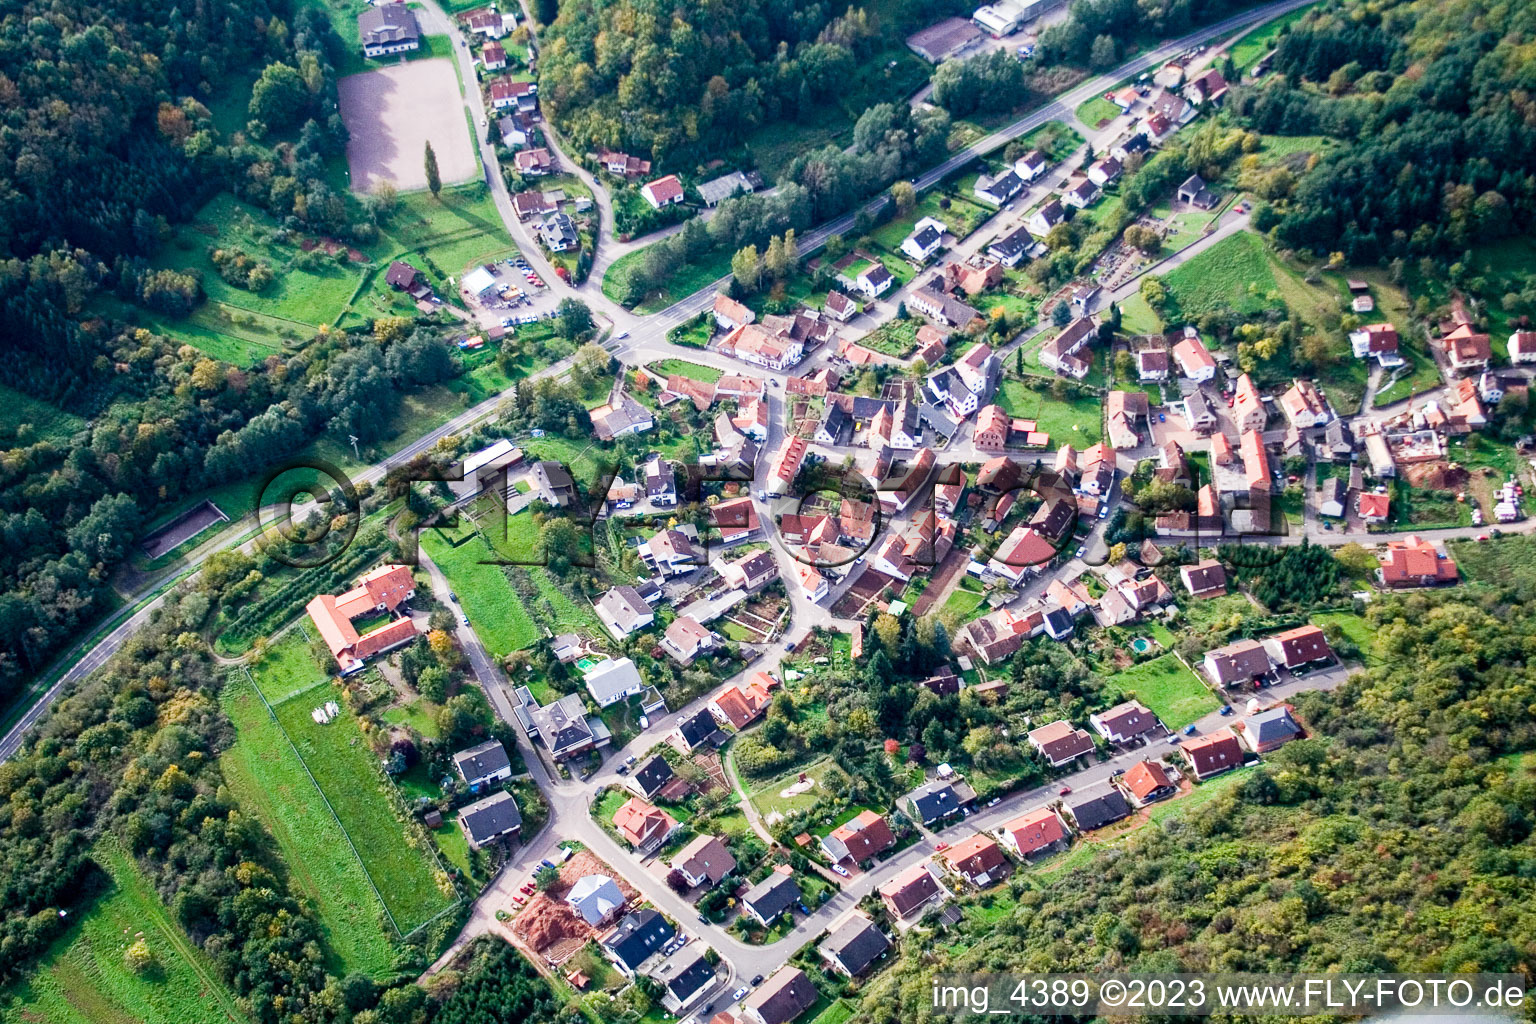 Waldhambach in the state Rhineland-Palatinate, Germany seen from a drone